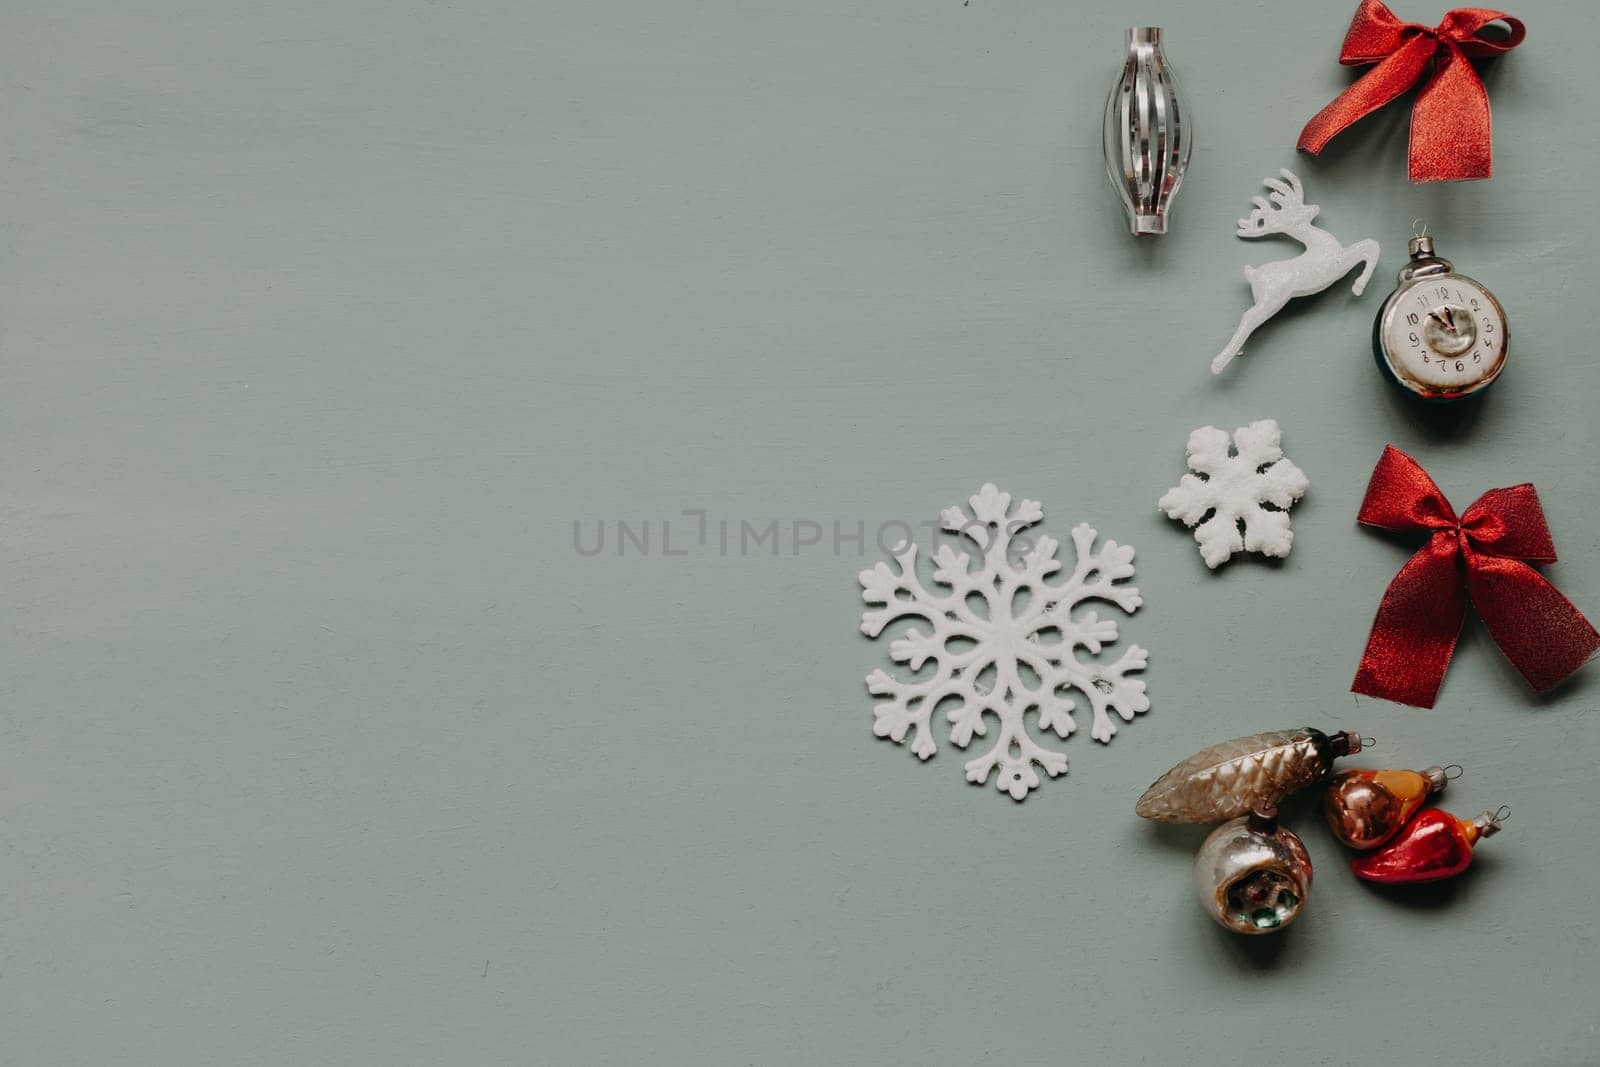 Christmas decoration Christmas tree toys new year gifts holiday green background by Simakov